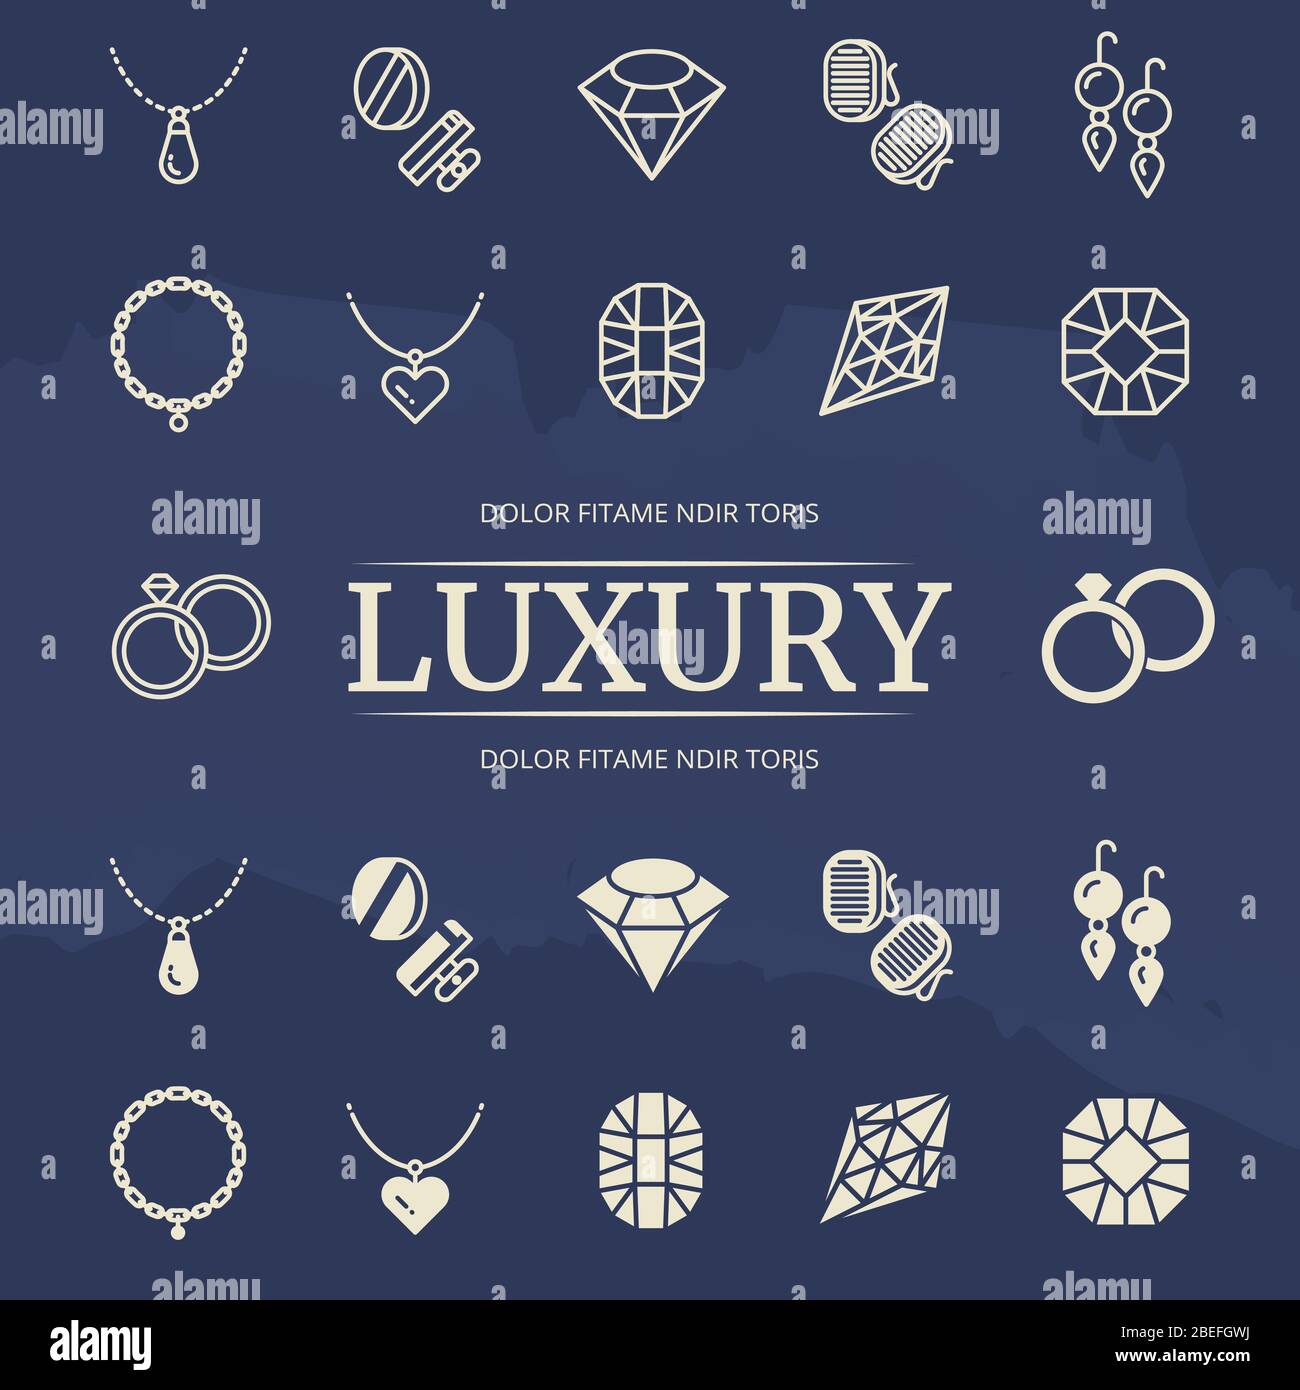 Jewelry and diamonds line and silhouette icons set on grunge background. Vector illustration Stock Vector